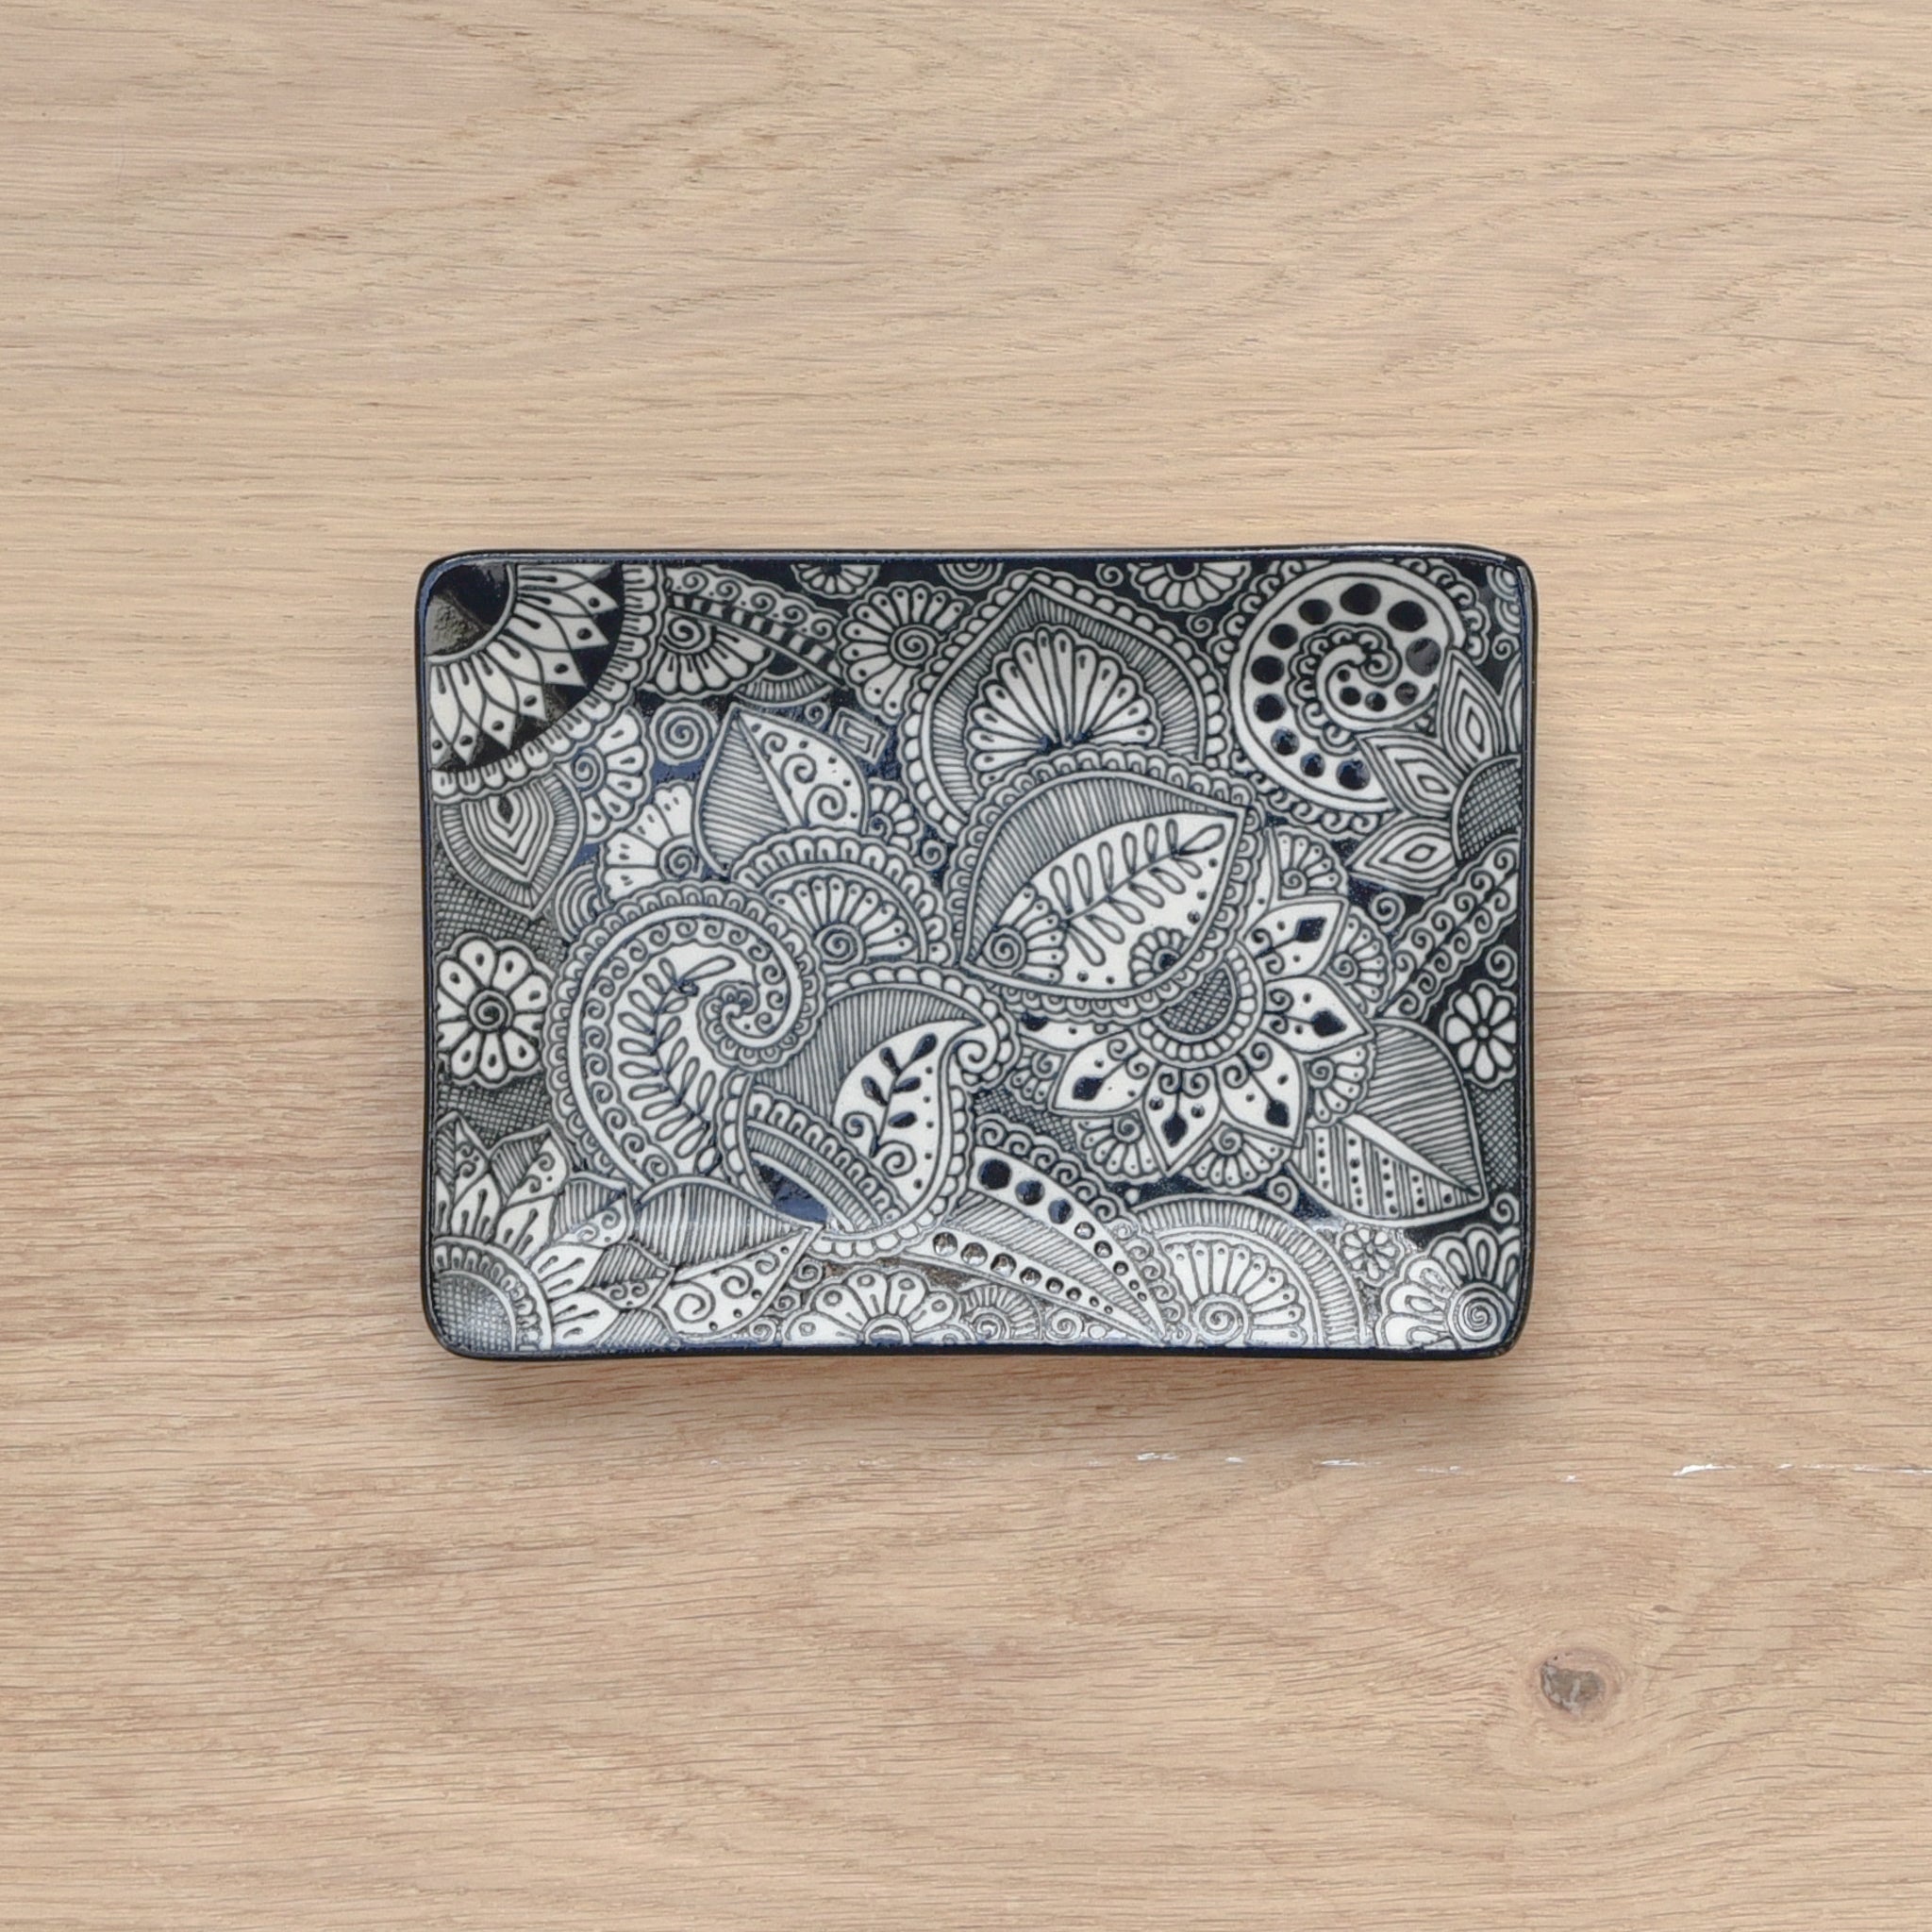 Handpainted Talavera-style ceramic tray in modern, black and white colors.